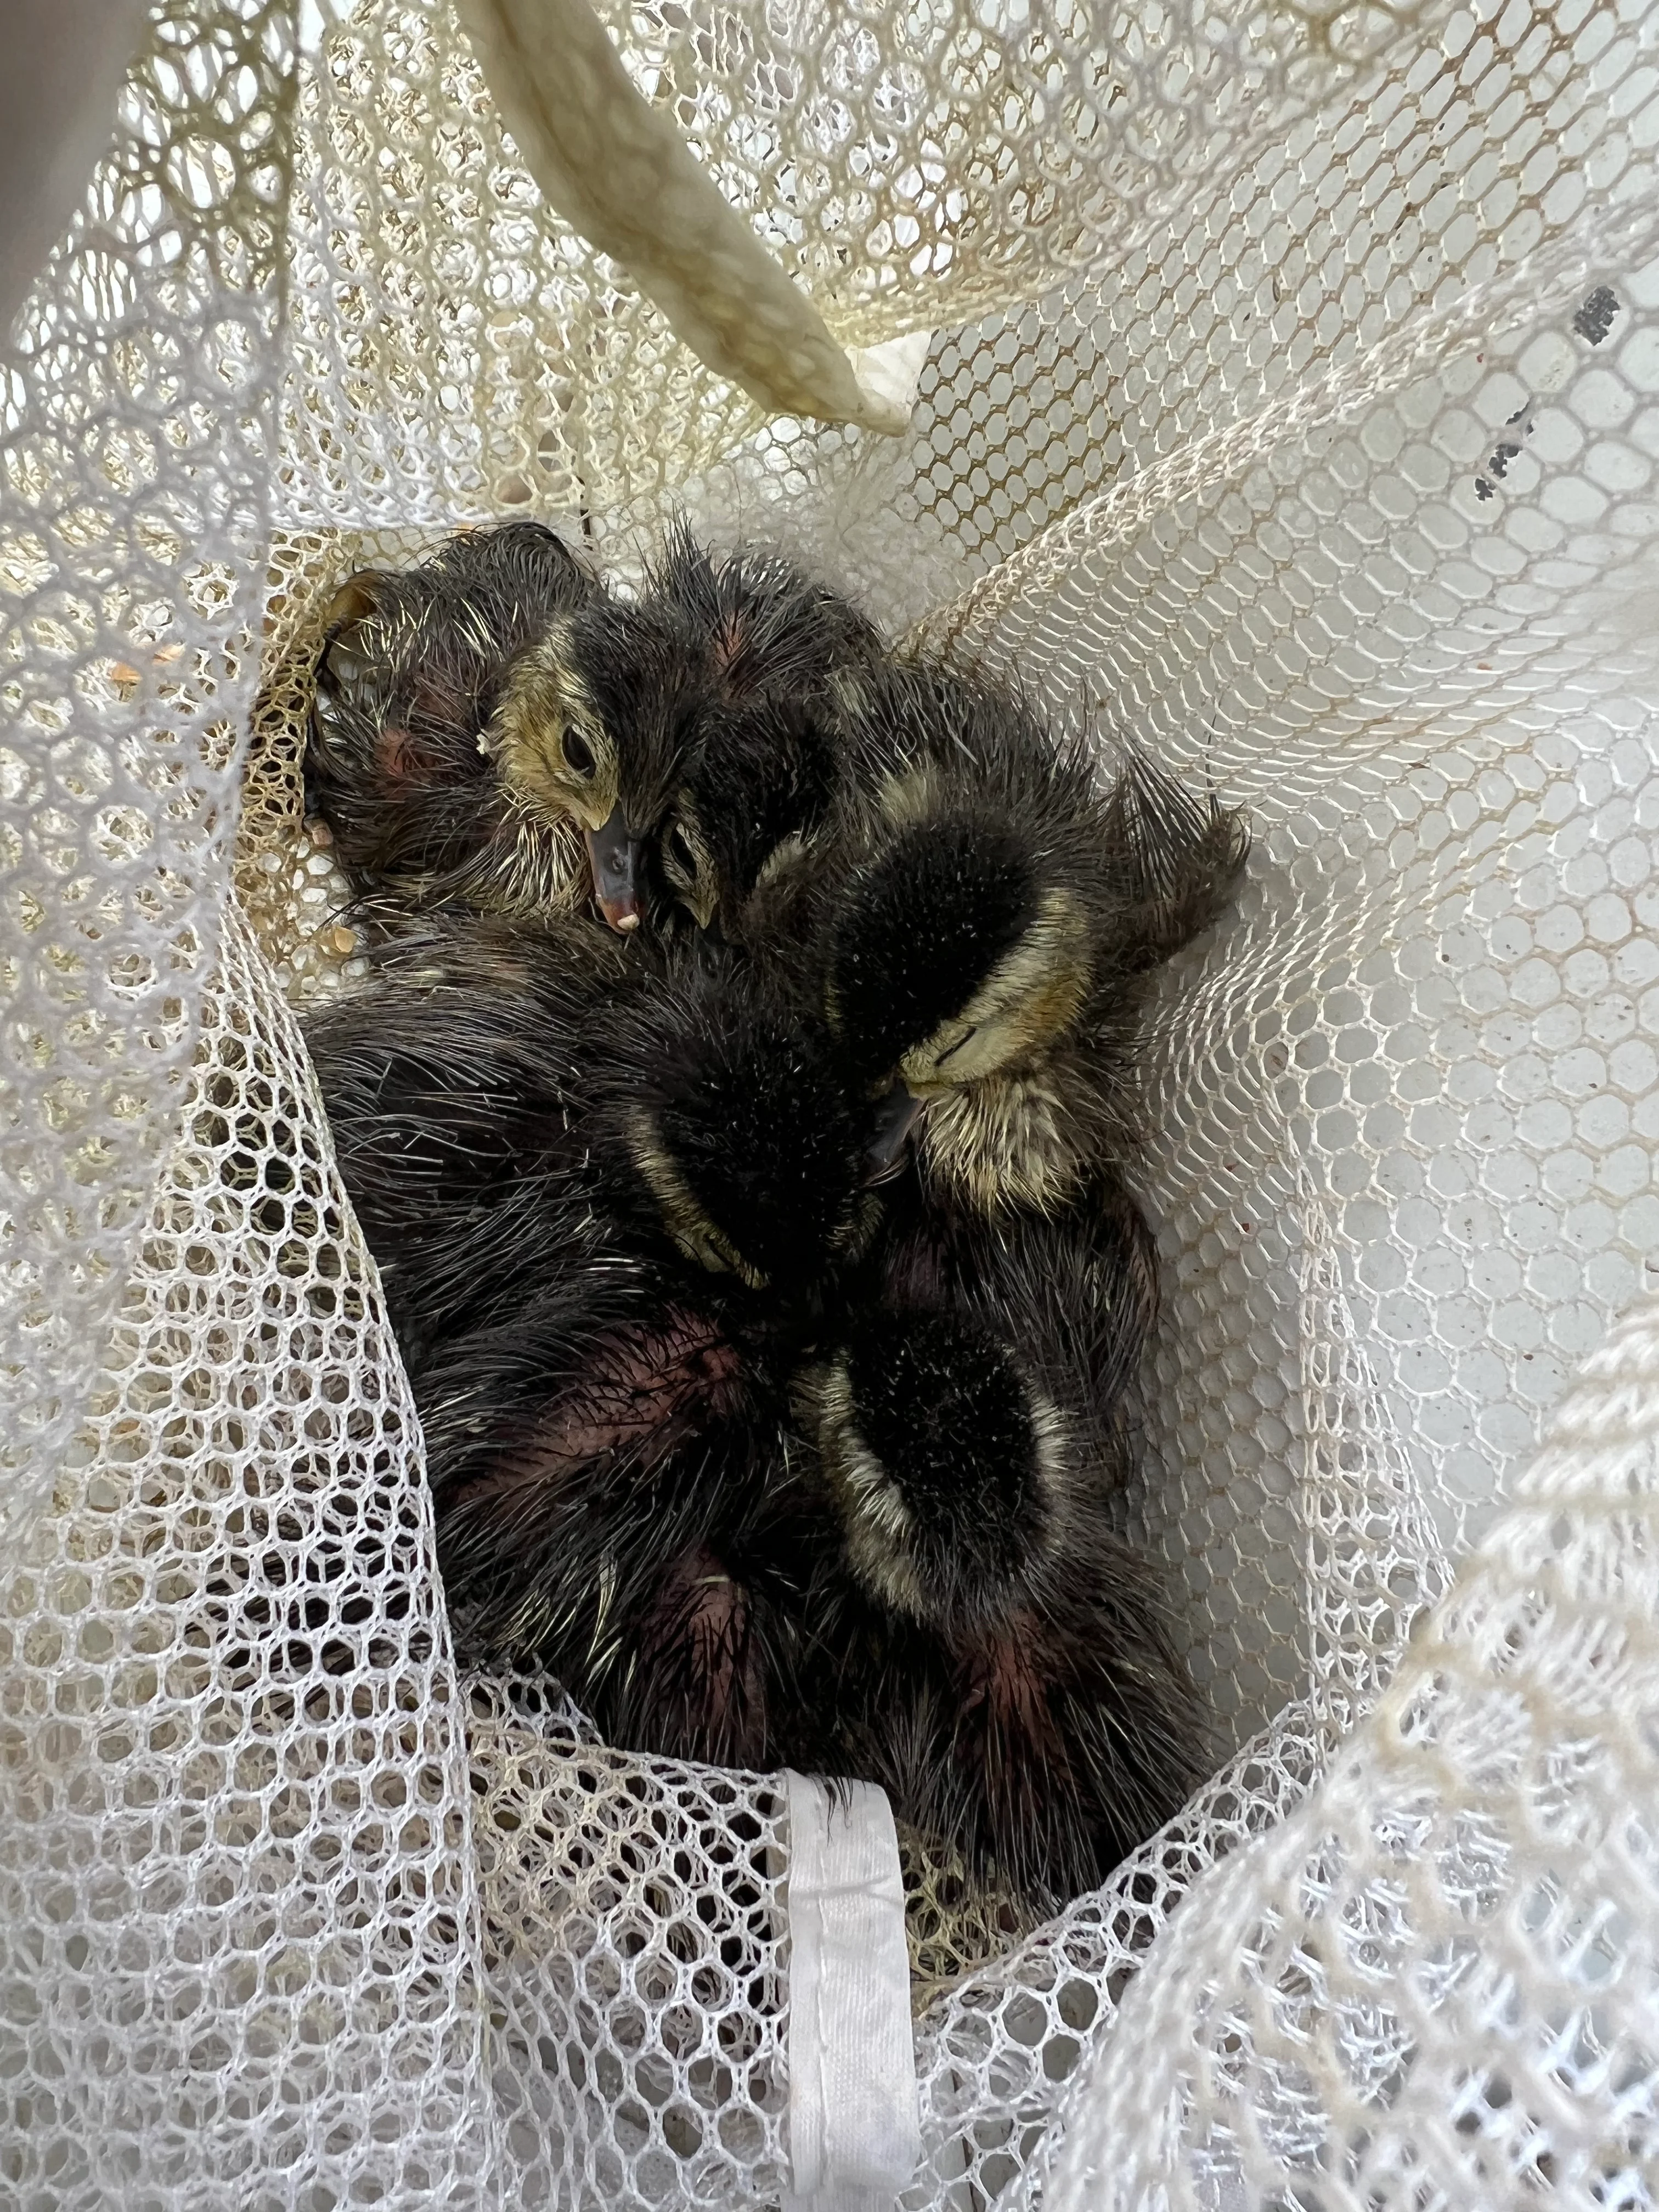 Wood duck siblings are placed in a mesh bag before they get measured. (Courtesy Joe Sweeney)